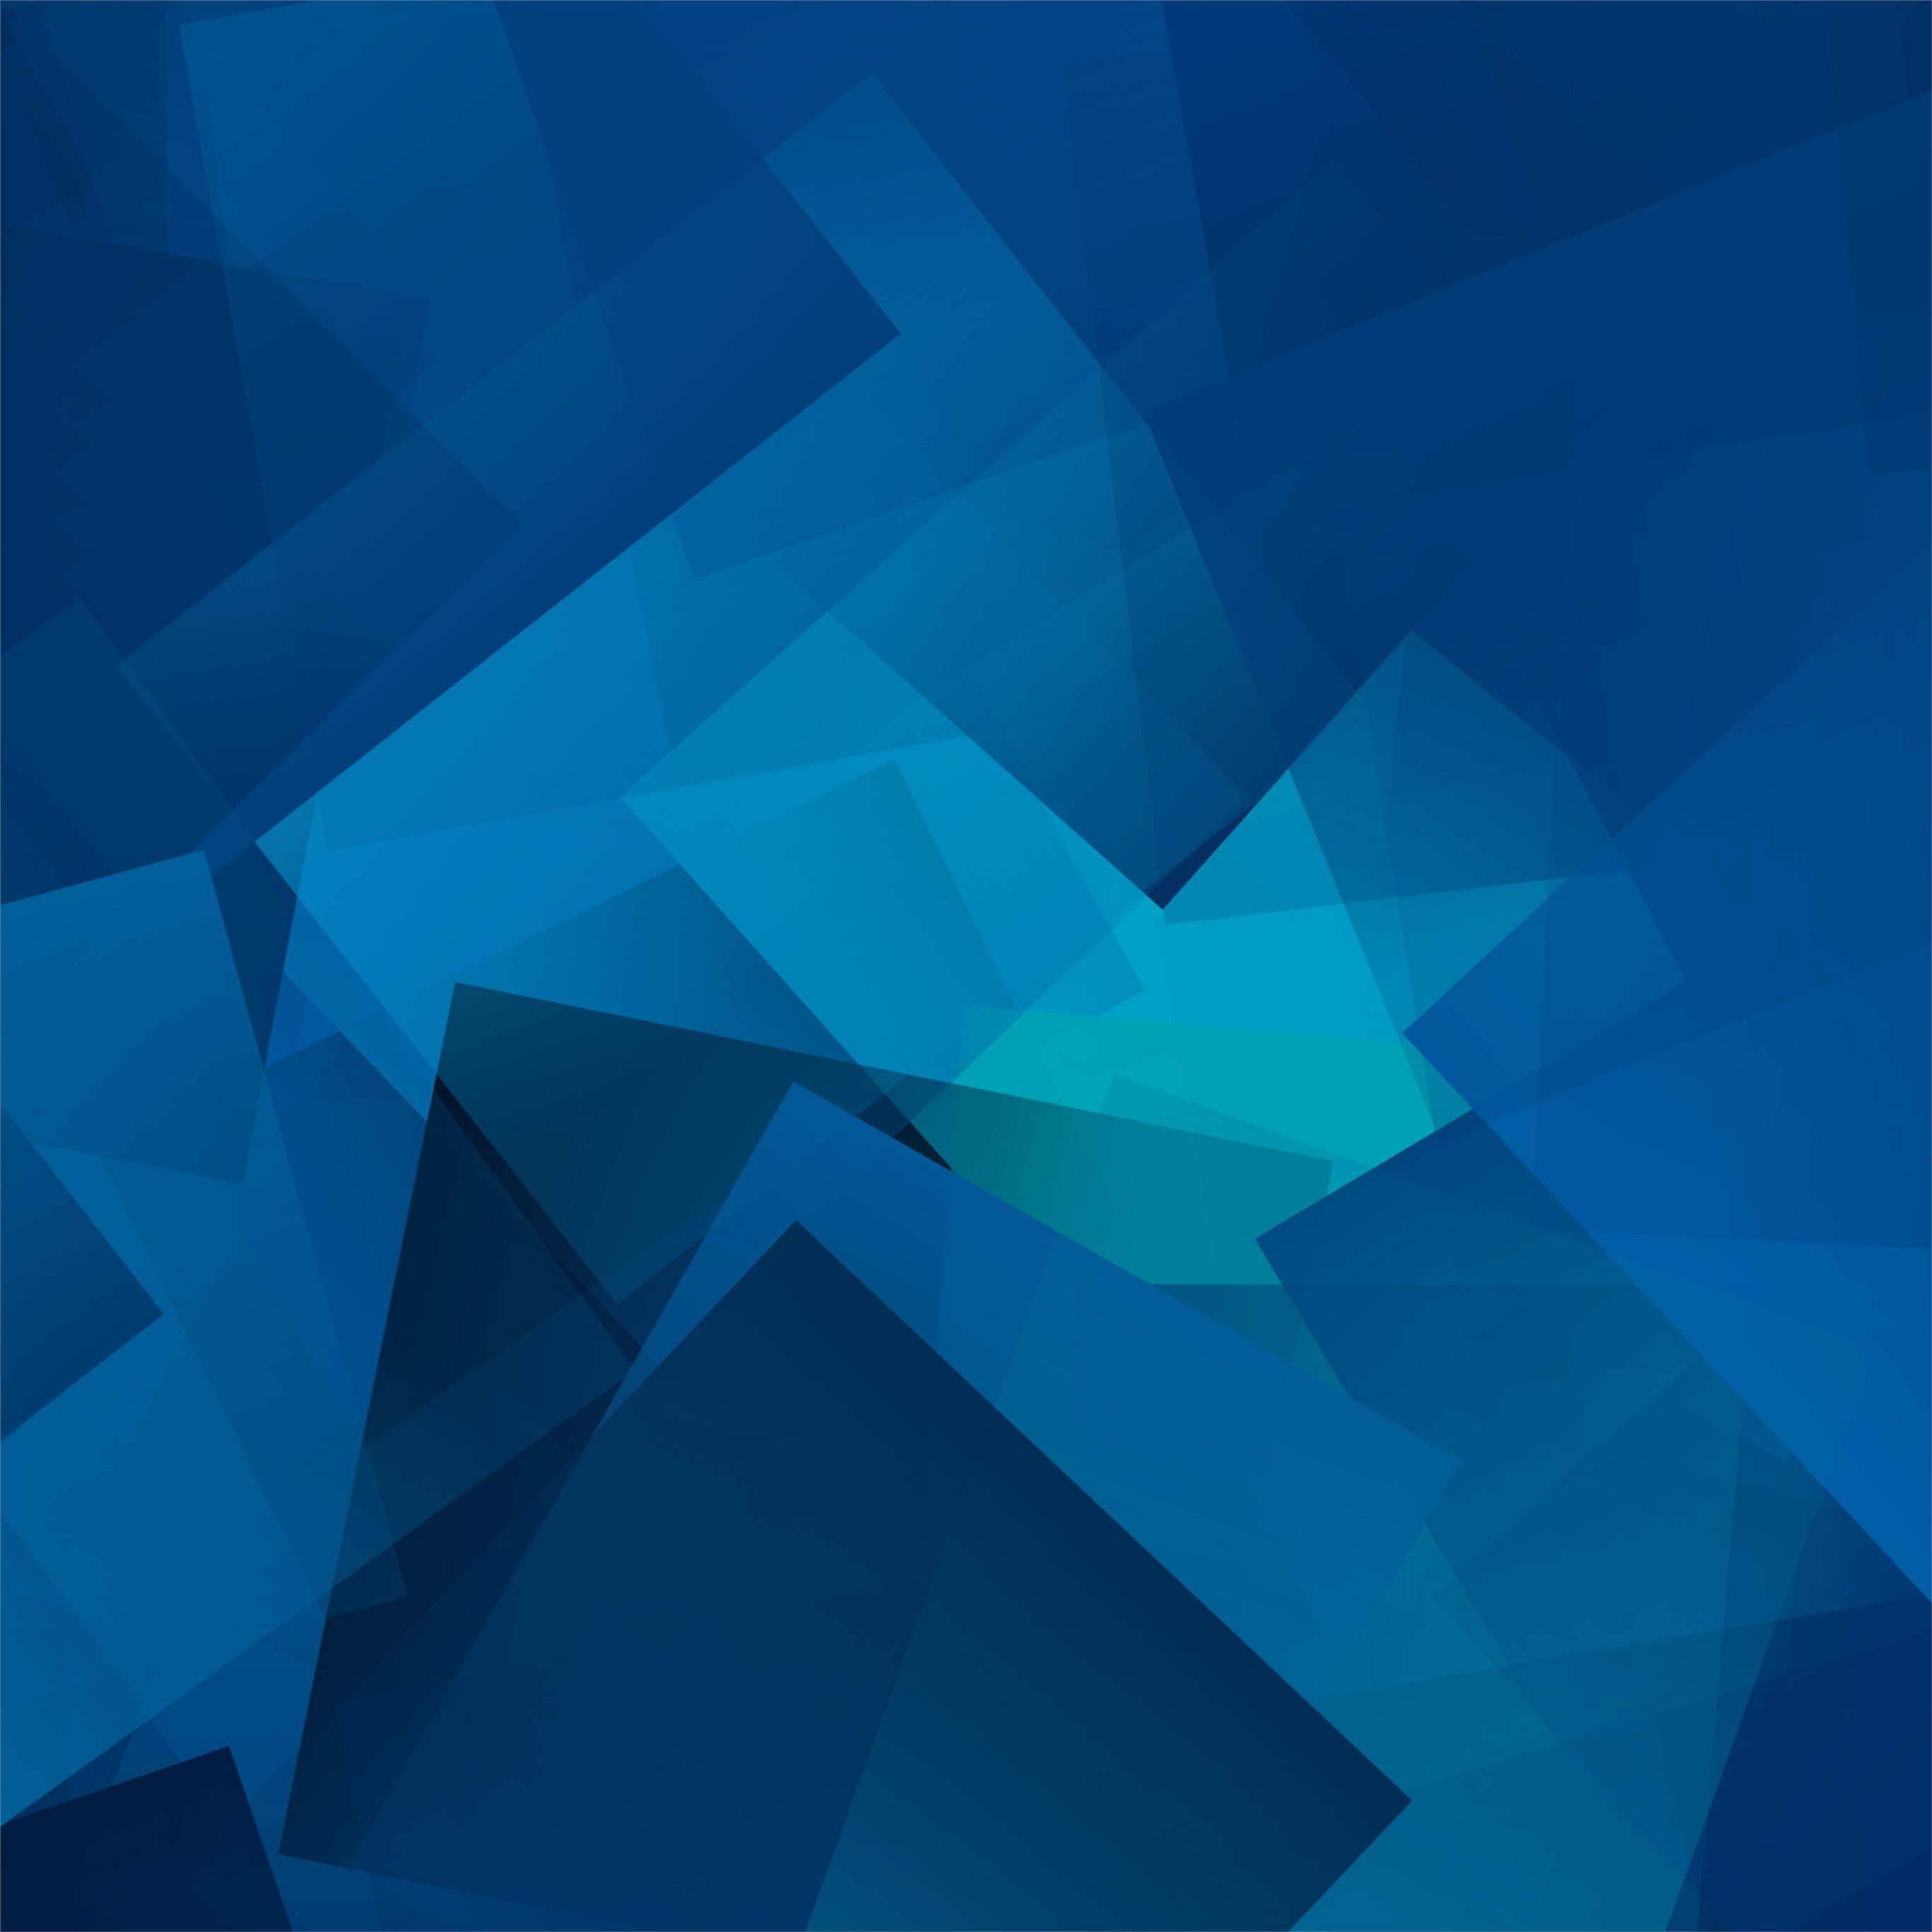 Abstract Gradient Hd Shapes Wallpapers